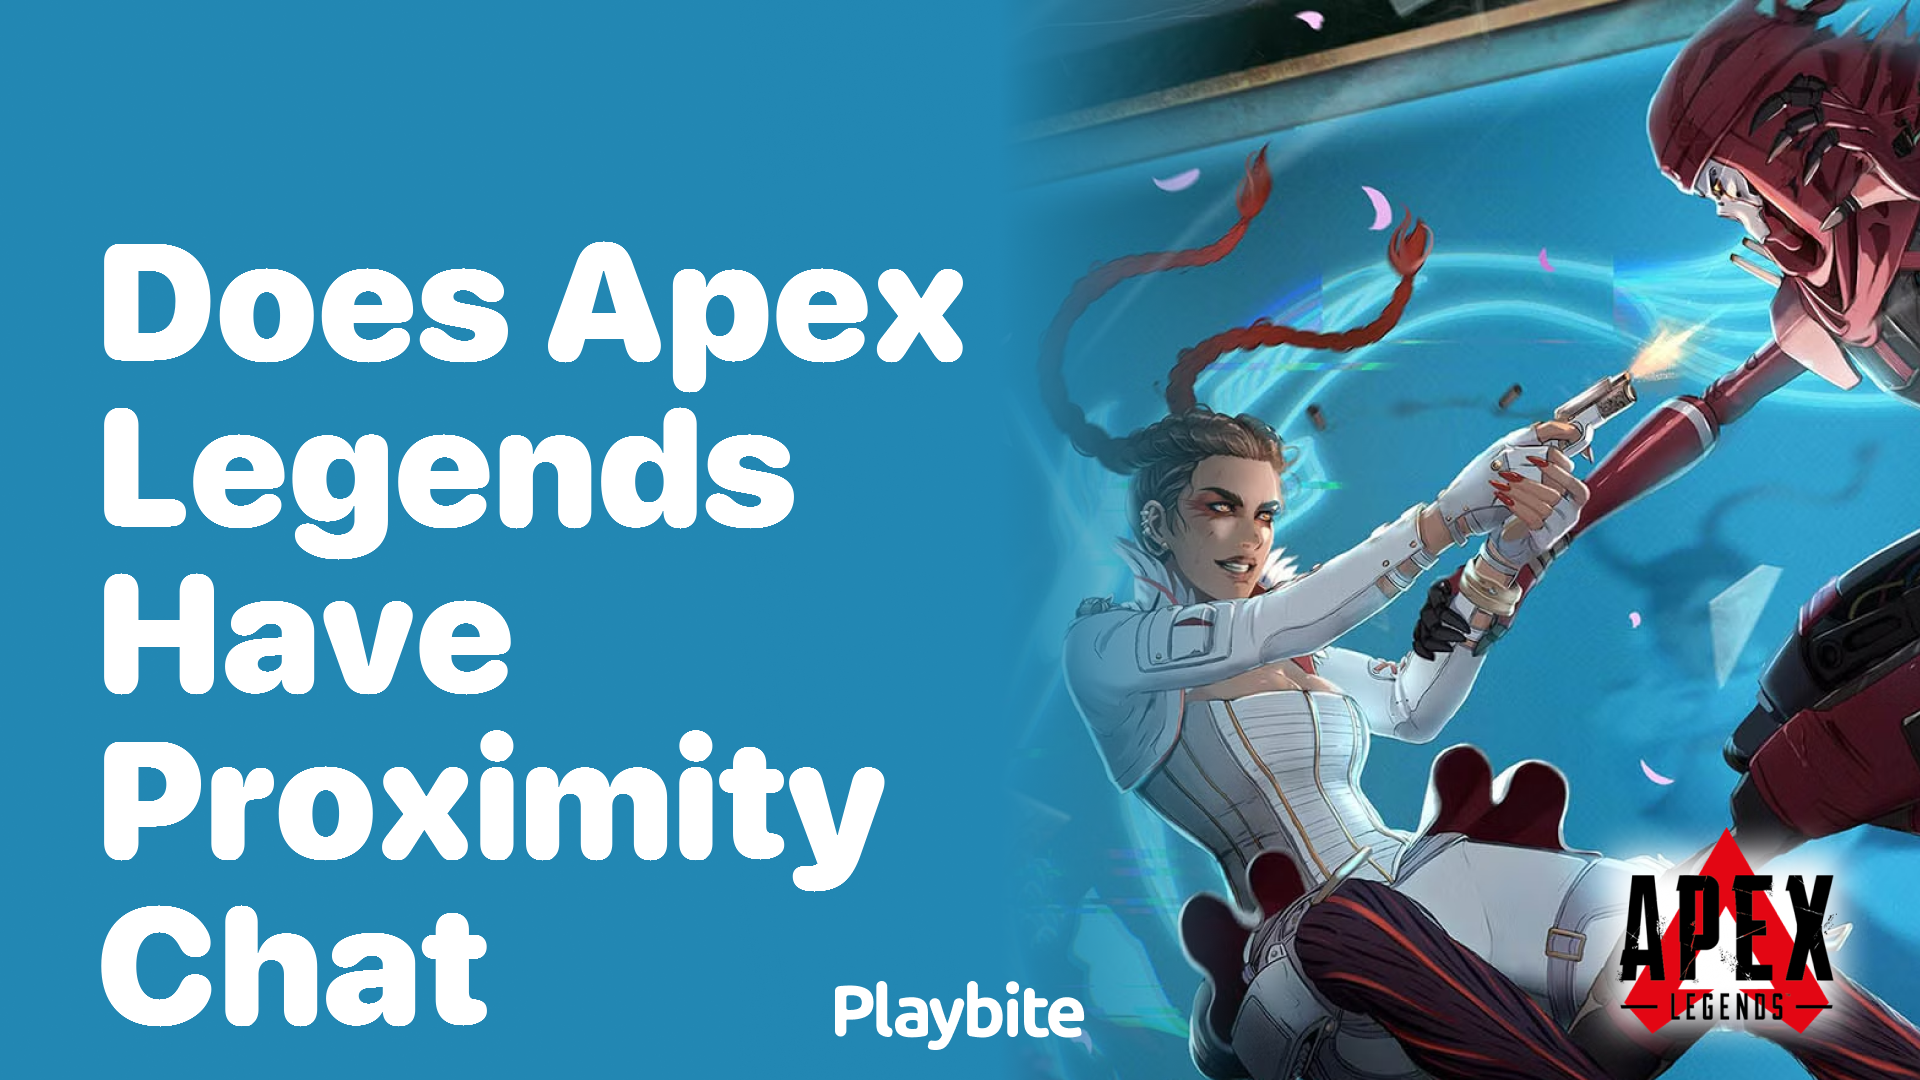 Does Apex Legends have proximity chat?